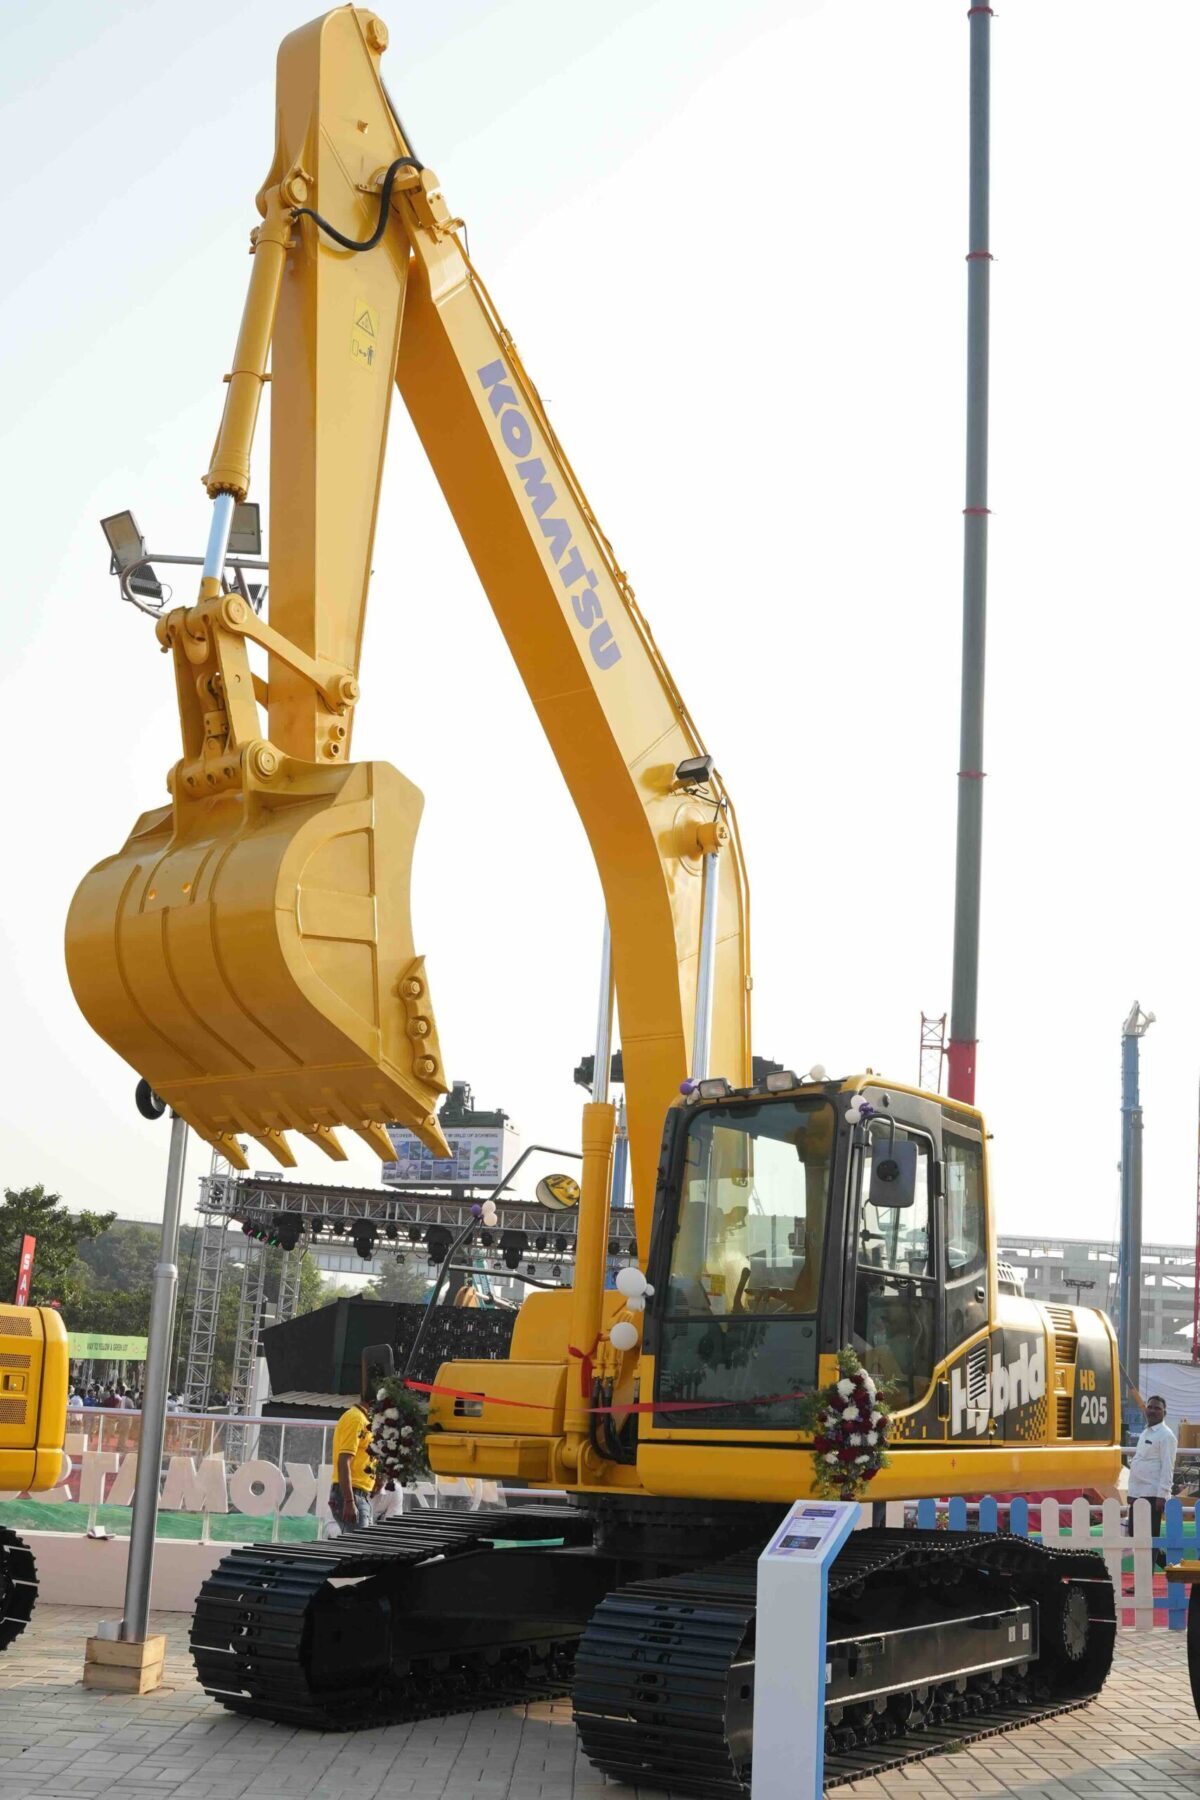 Komatsu and L&T at Excon 2023